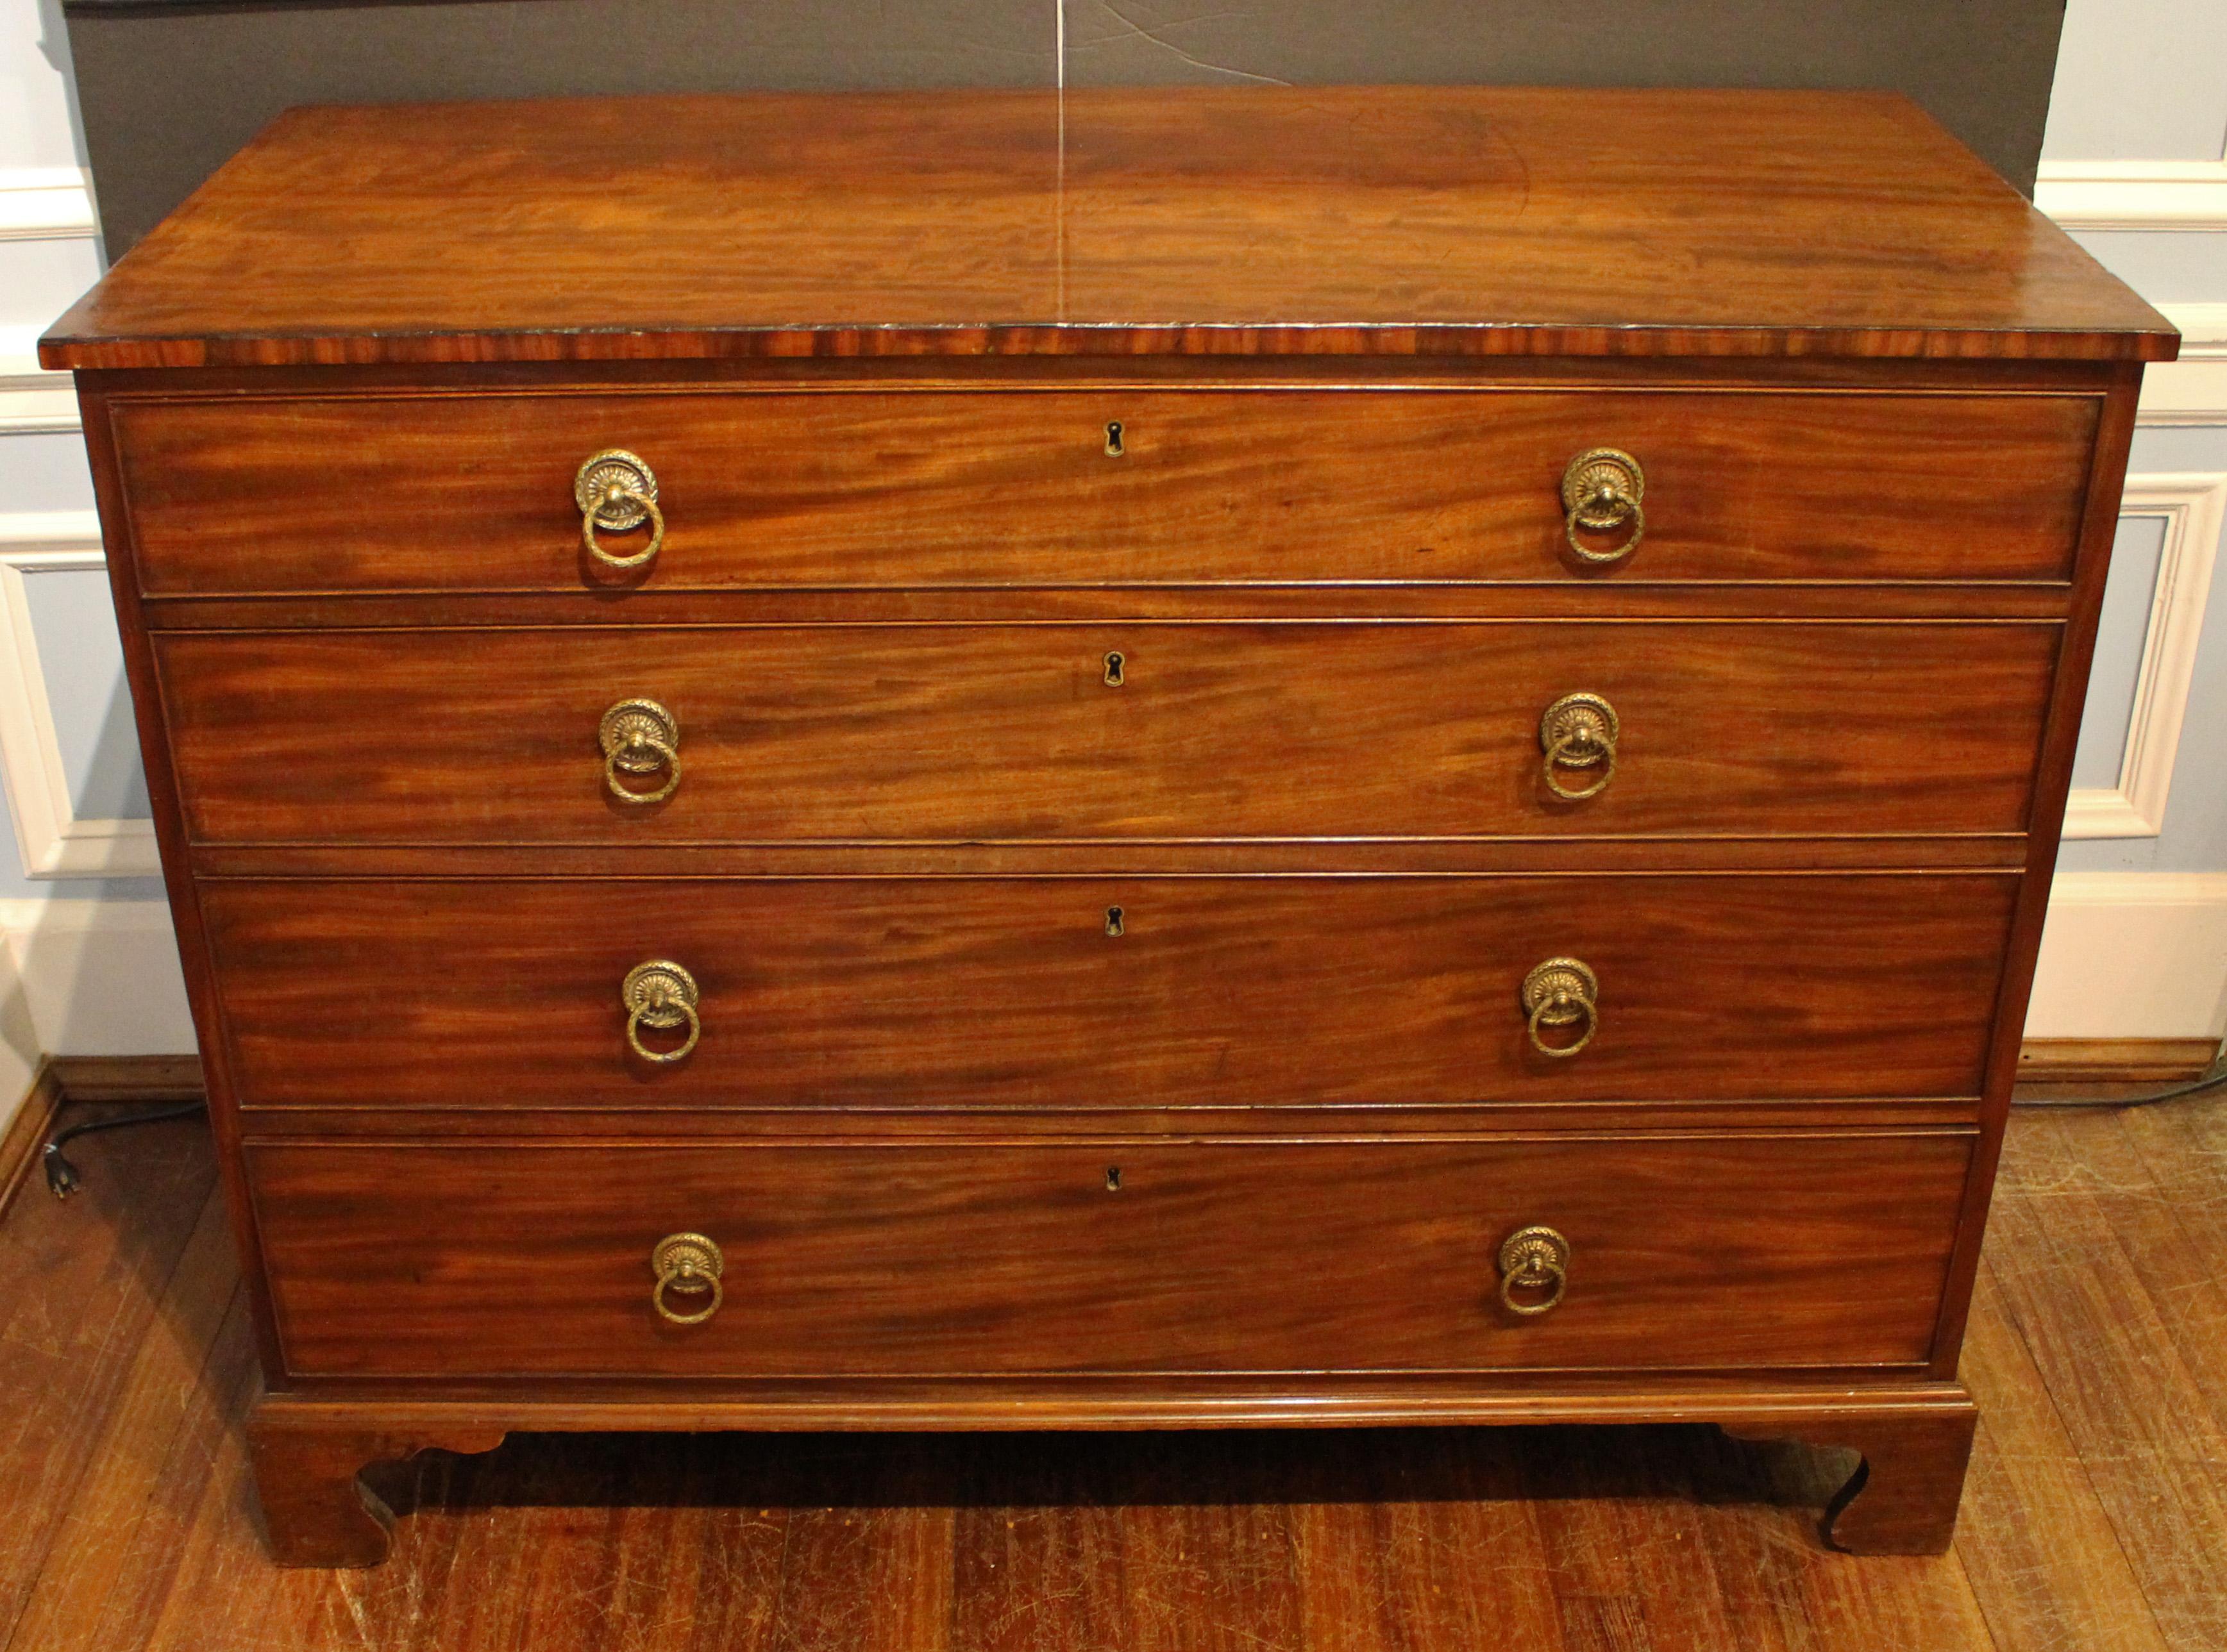 Late 18th-early 19th century Georgian chest of drawers. Comprised of 4 graduated drawers with well cast brass laurel motif ring turned pulls. Cockbeaded drawers, raised on stout shaped bracket feet. Top with a moderate amount of scrapes, marks &